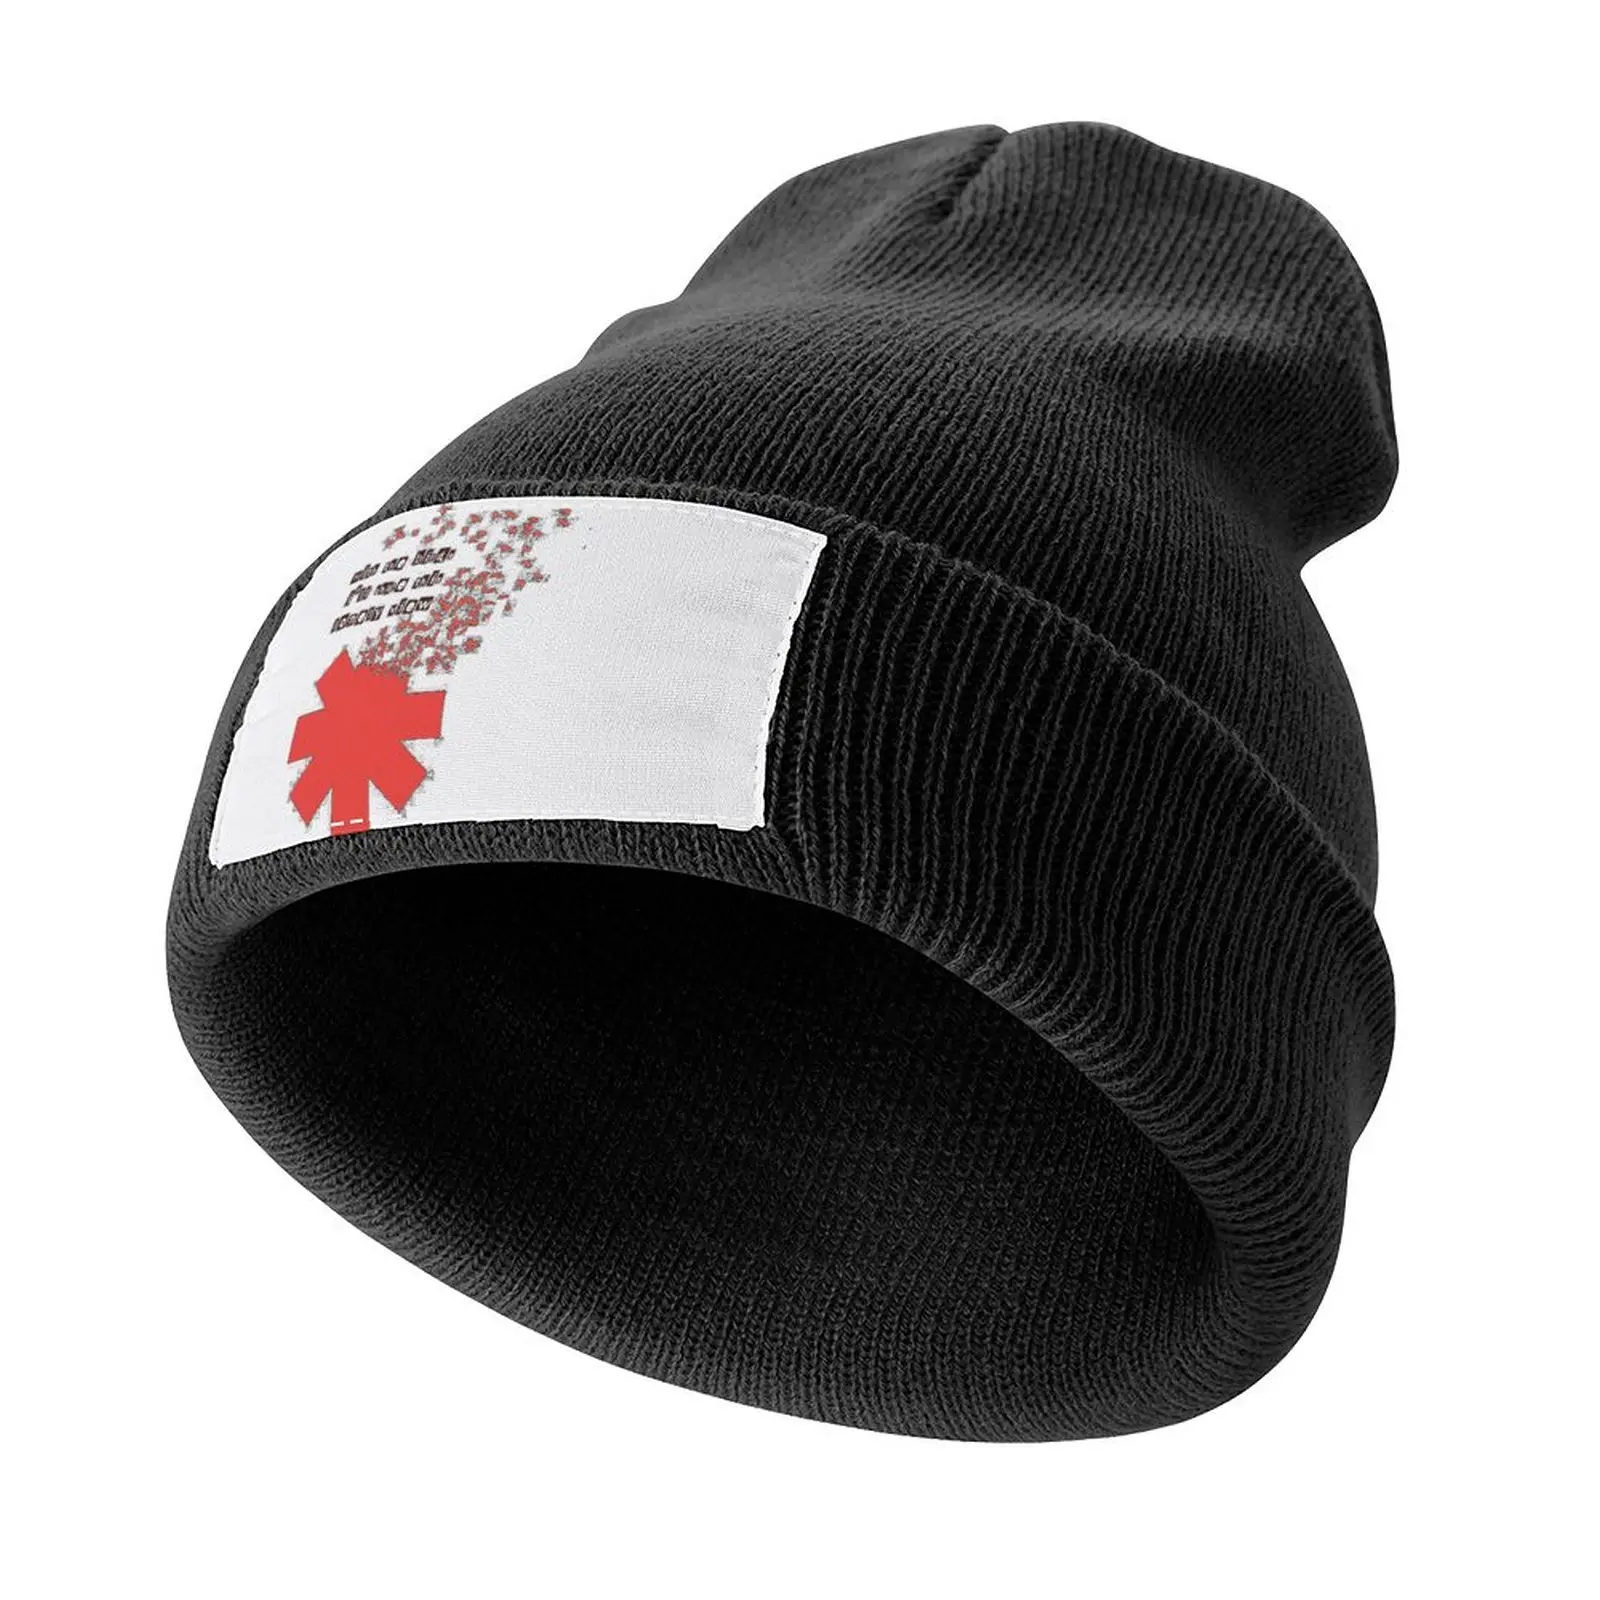 

With The Birds RHCP Iconic Knitted Cap Rave New In The Hat Trucker Hats hard hat Men's Caps Women's